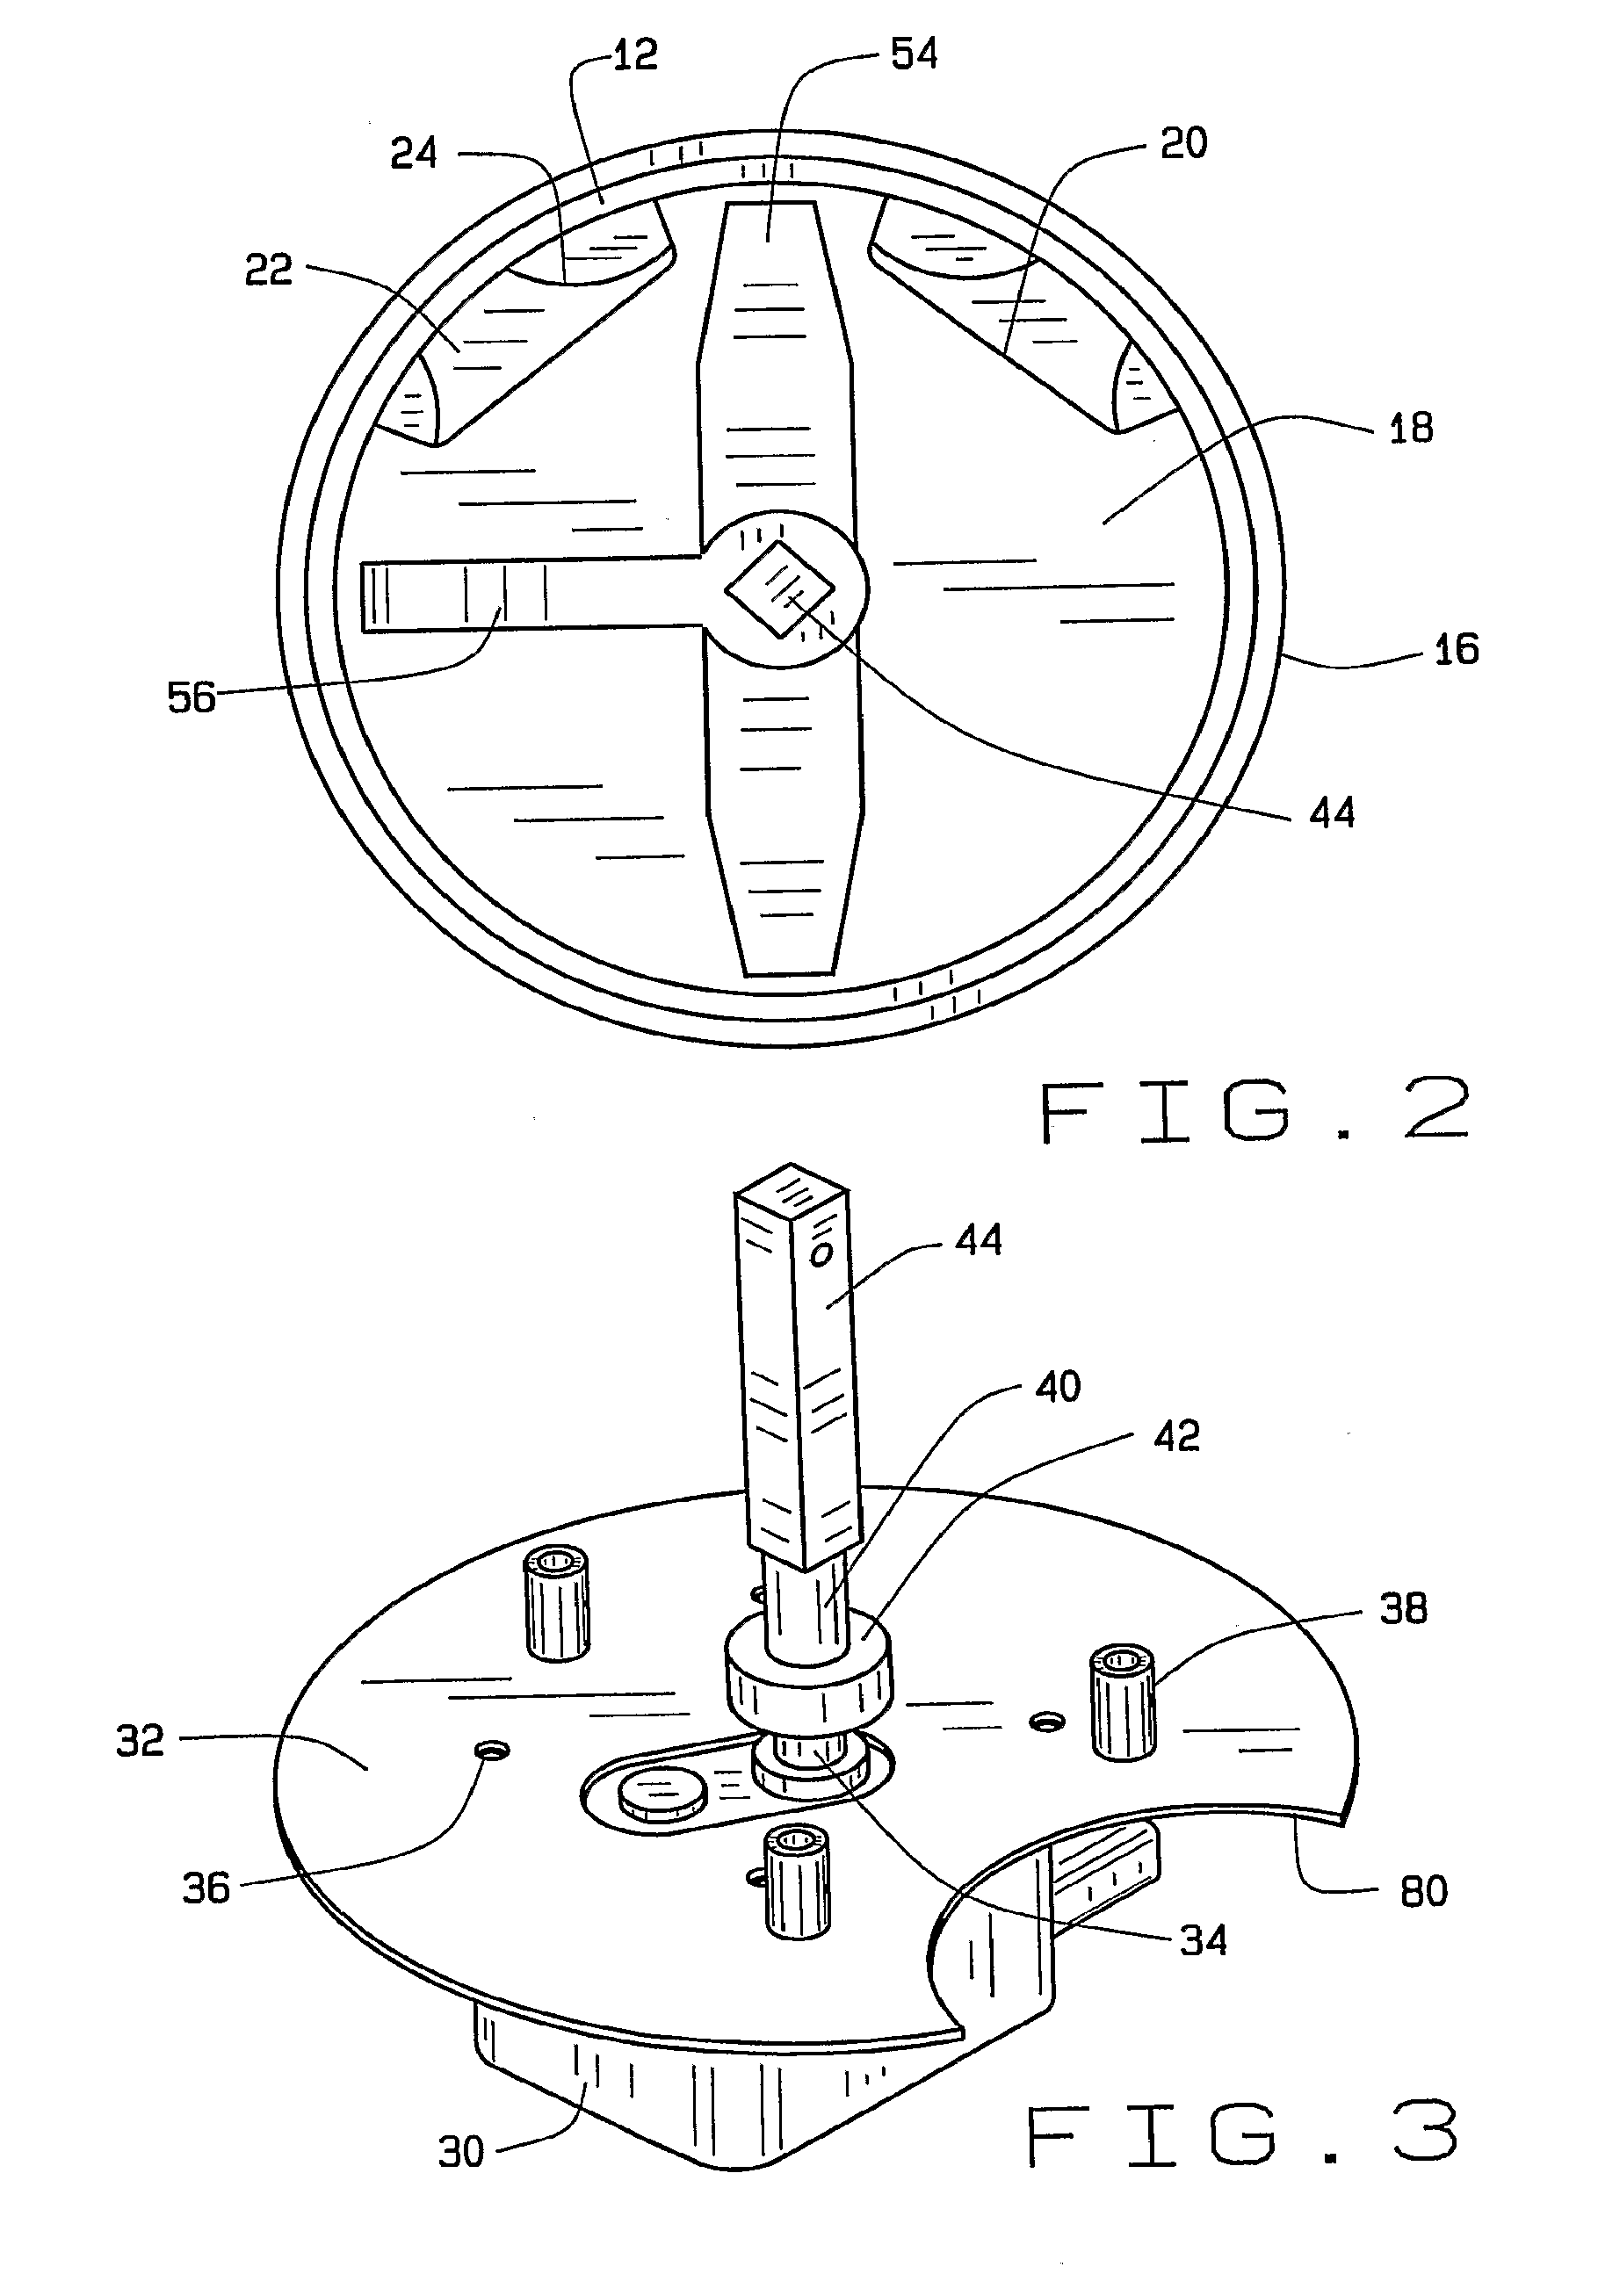 Programmable Dispensing Device